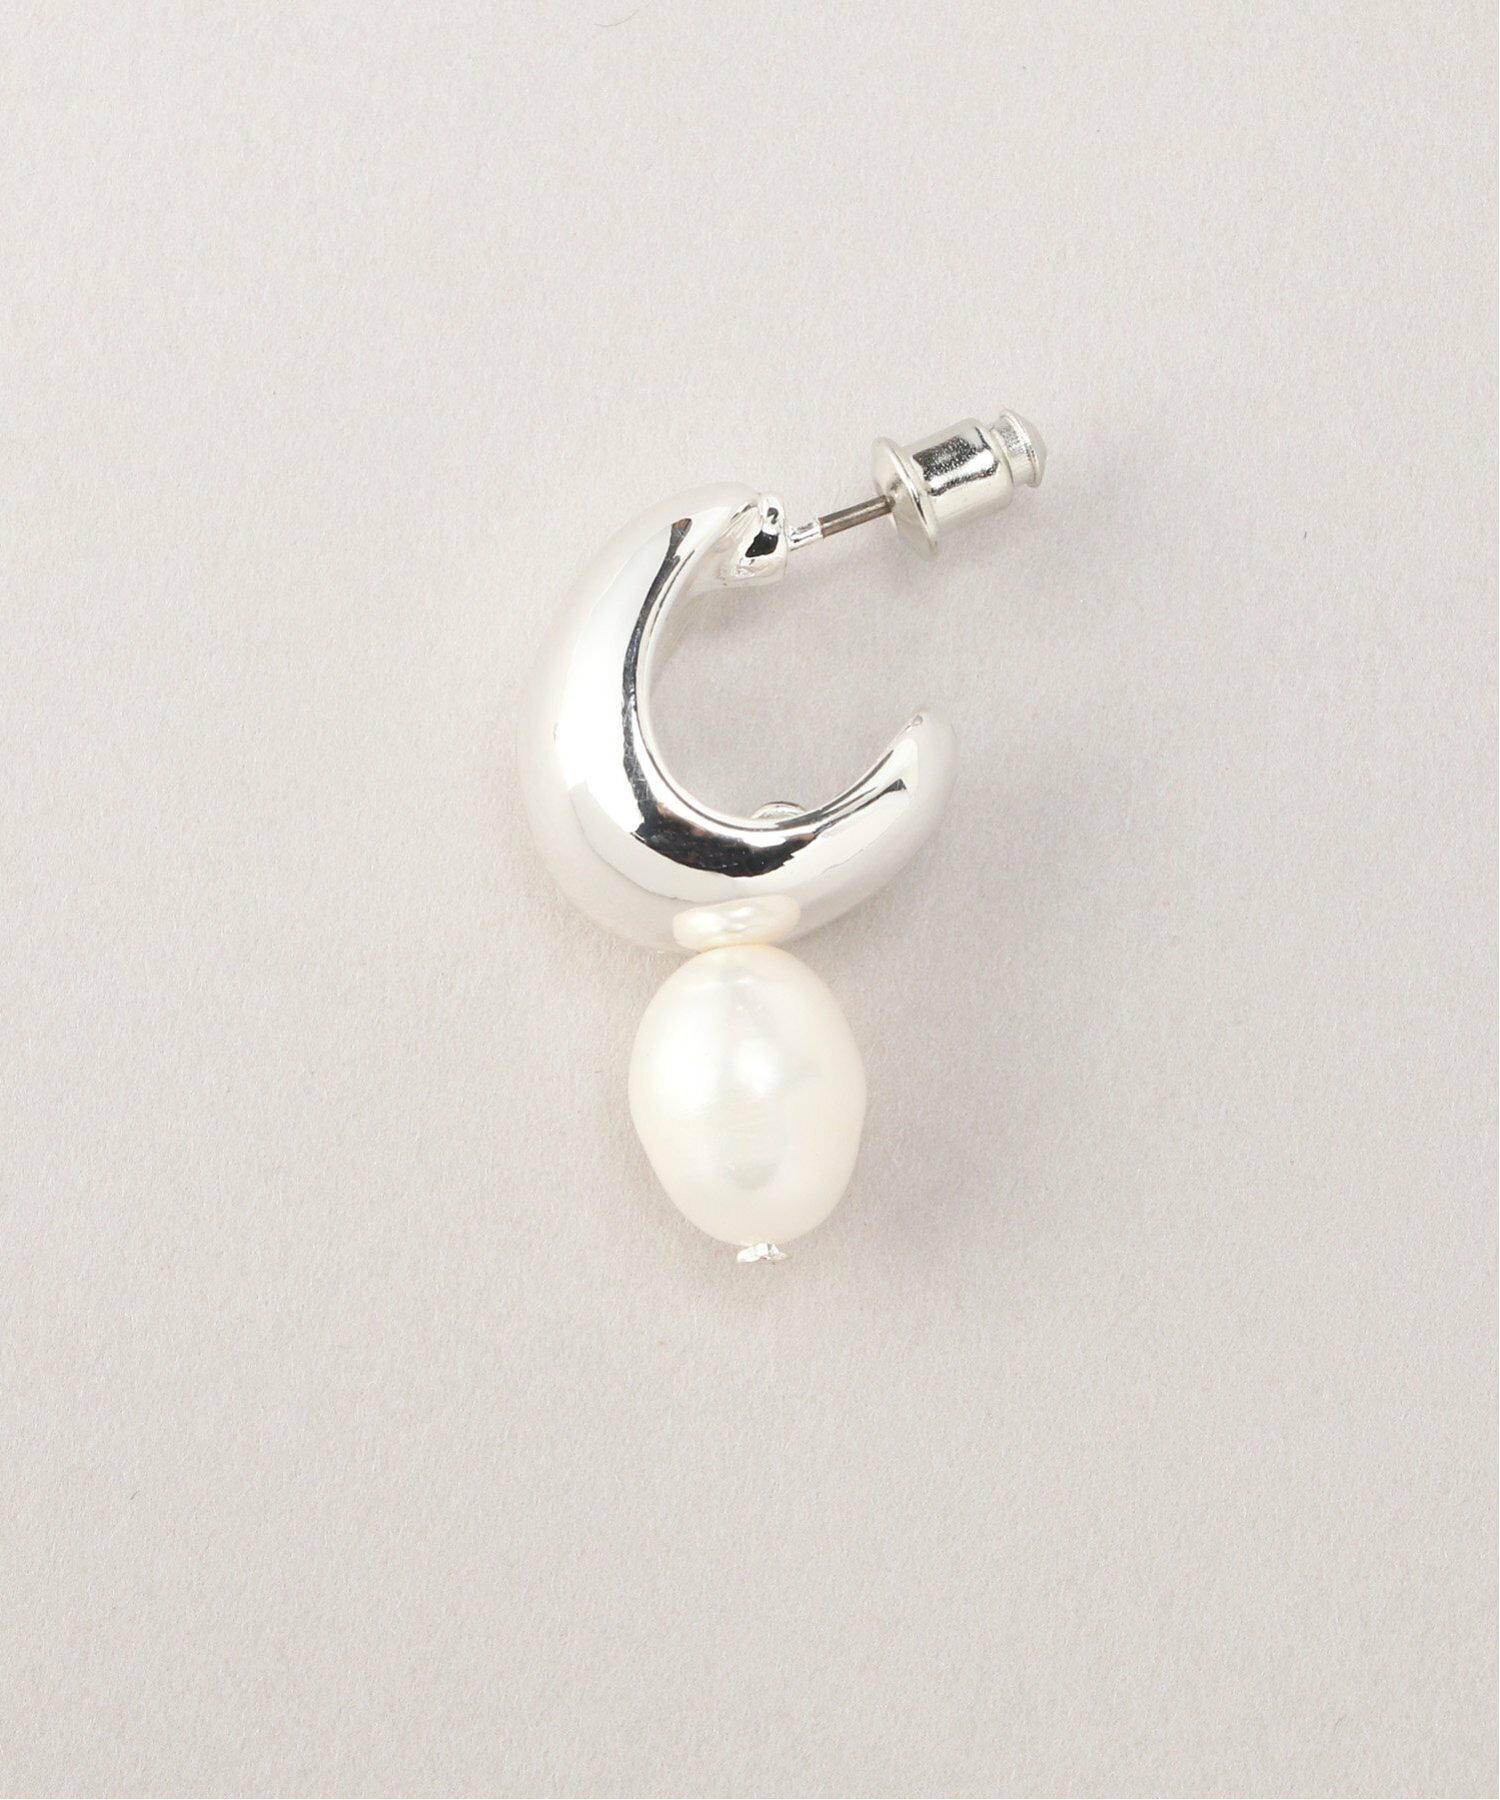 Nothing And Others/Freshwaterpearl Ear Set